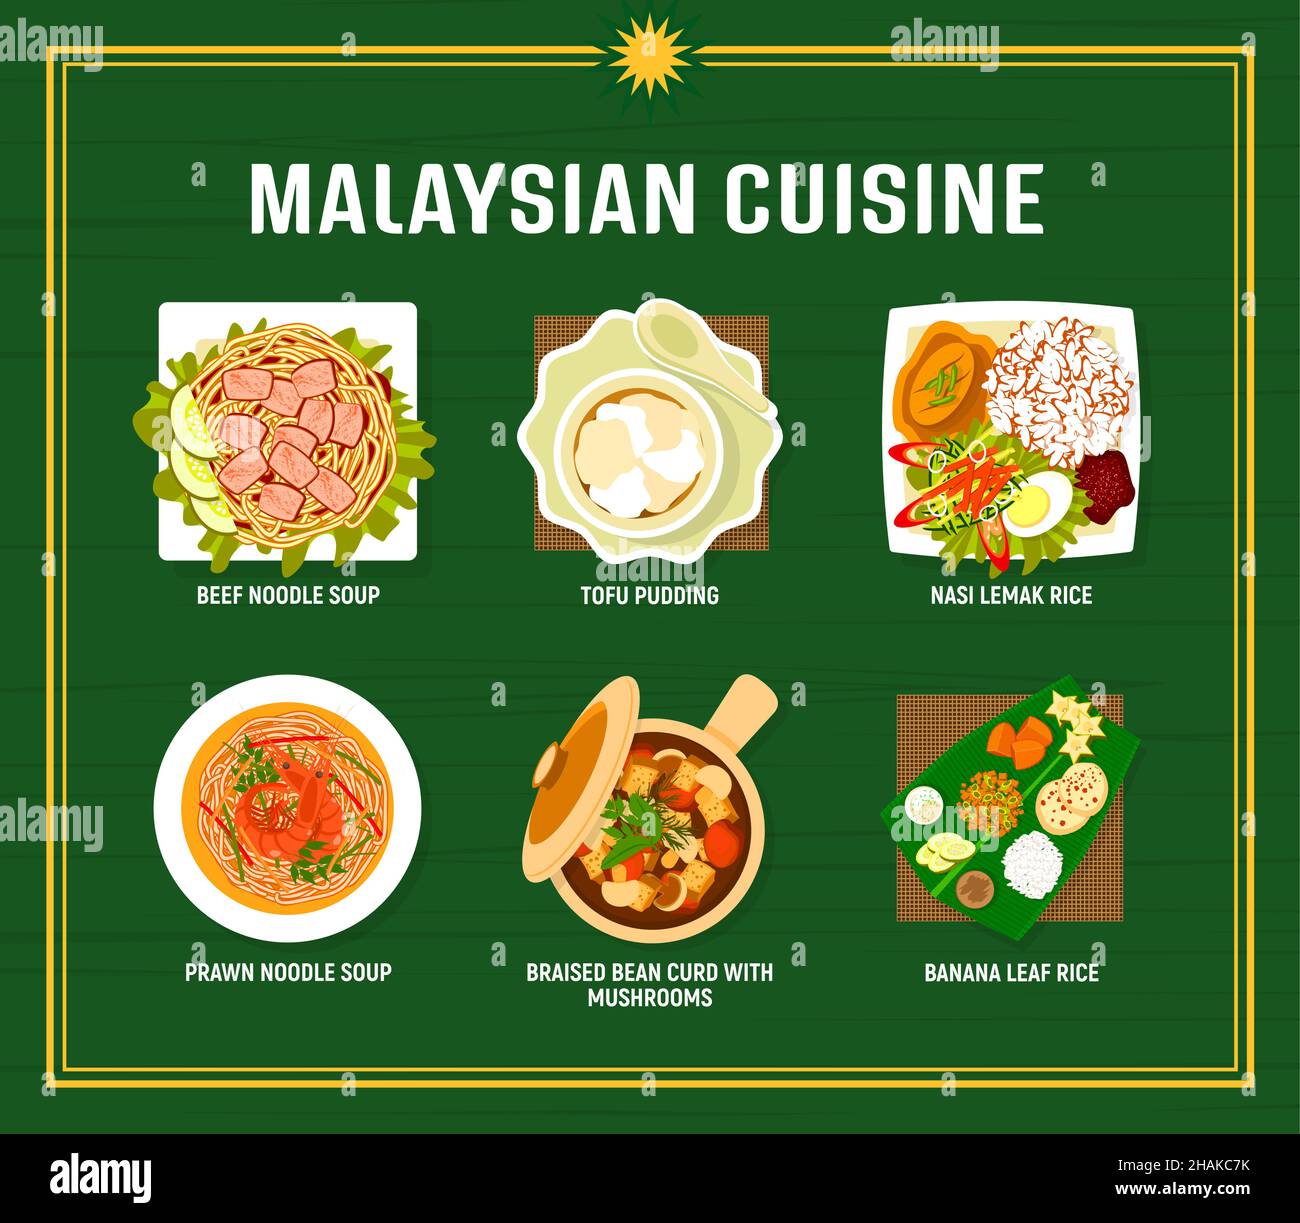 Malaysian cuisine menu vector beef or prawn noodle soups, tofu pudding and nasi lemak rice meals. Braised bean curd with mushrooms and banana leaf ric Stock Vector